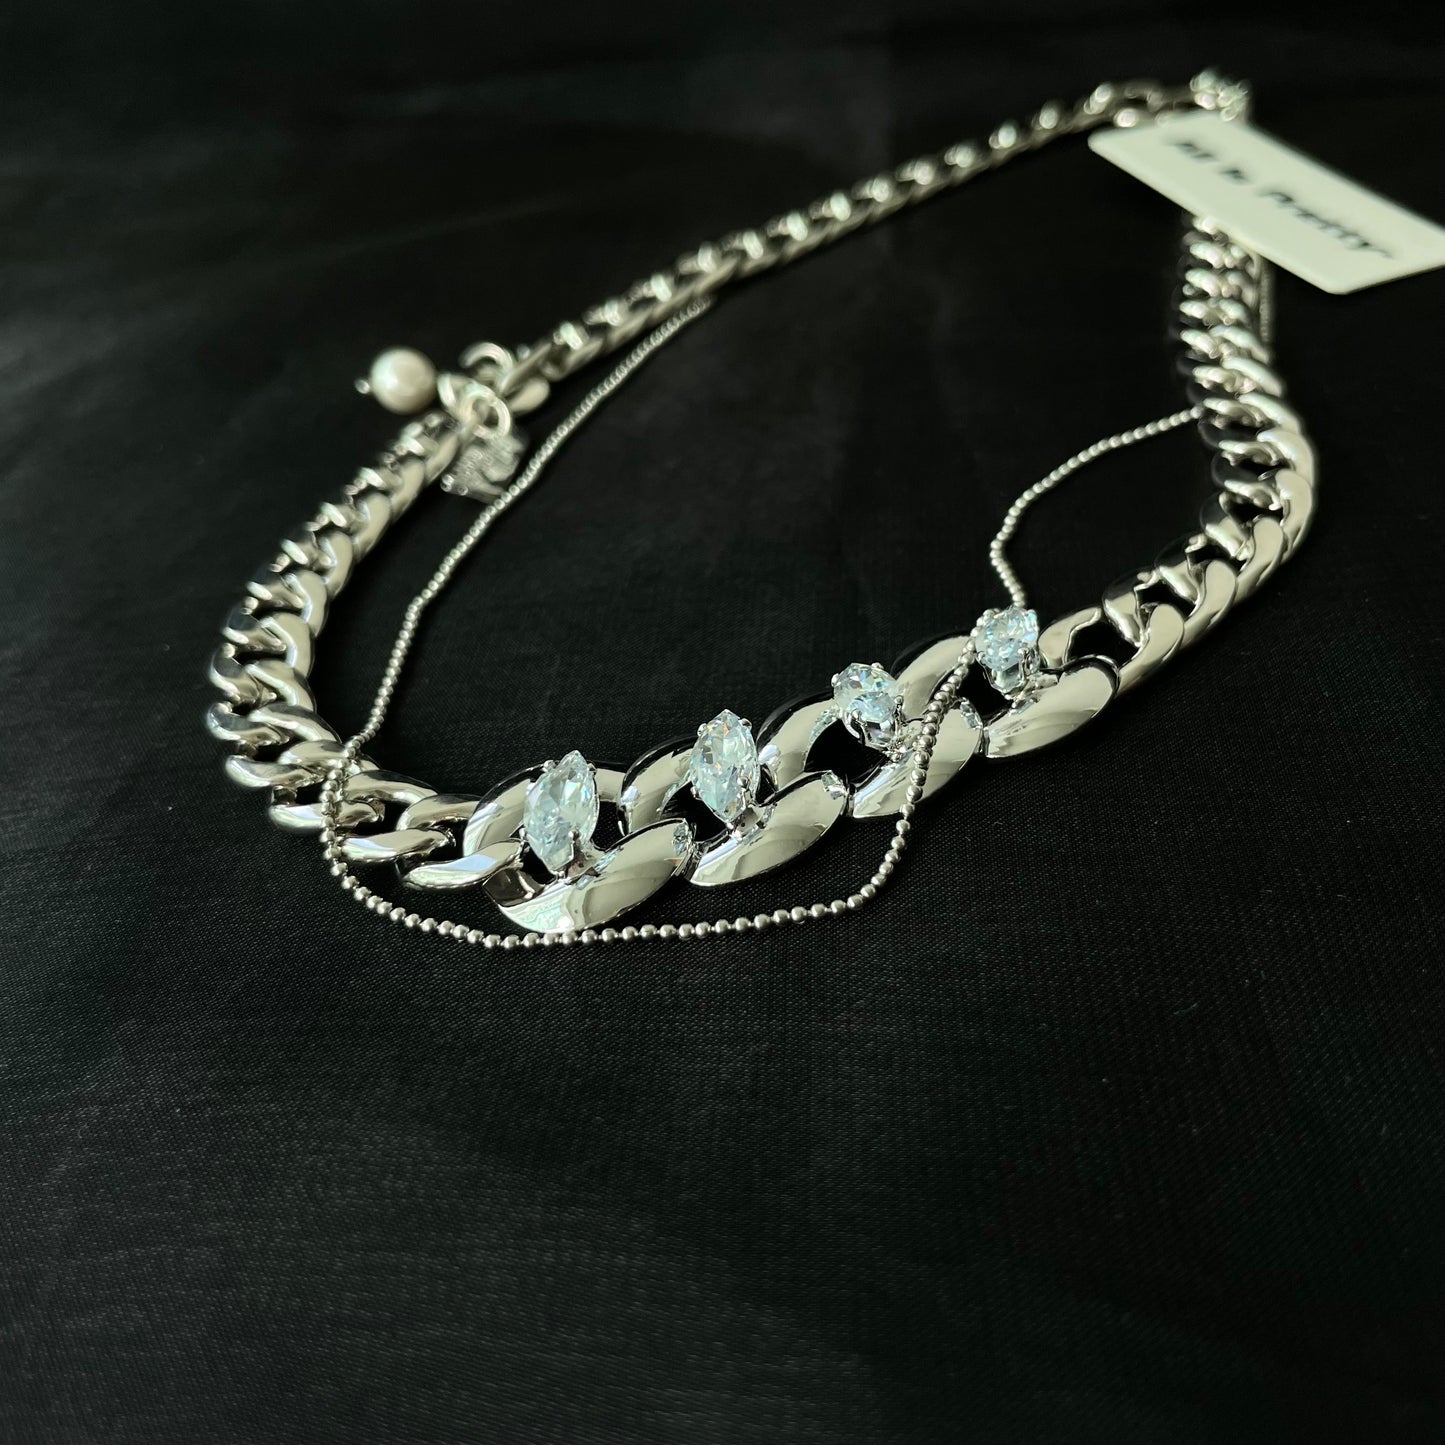 Crystal thick contract chain necklace